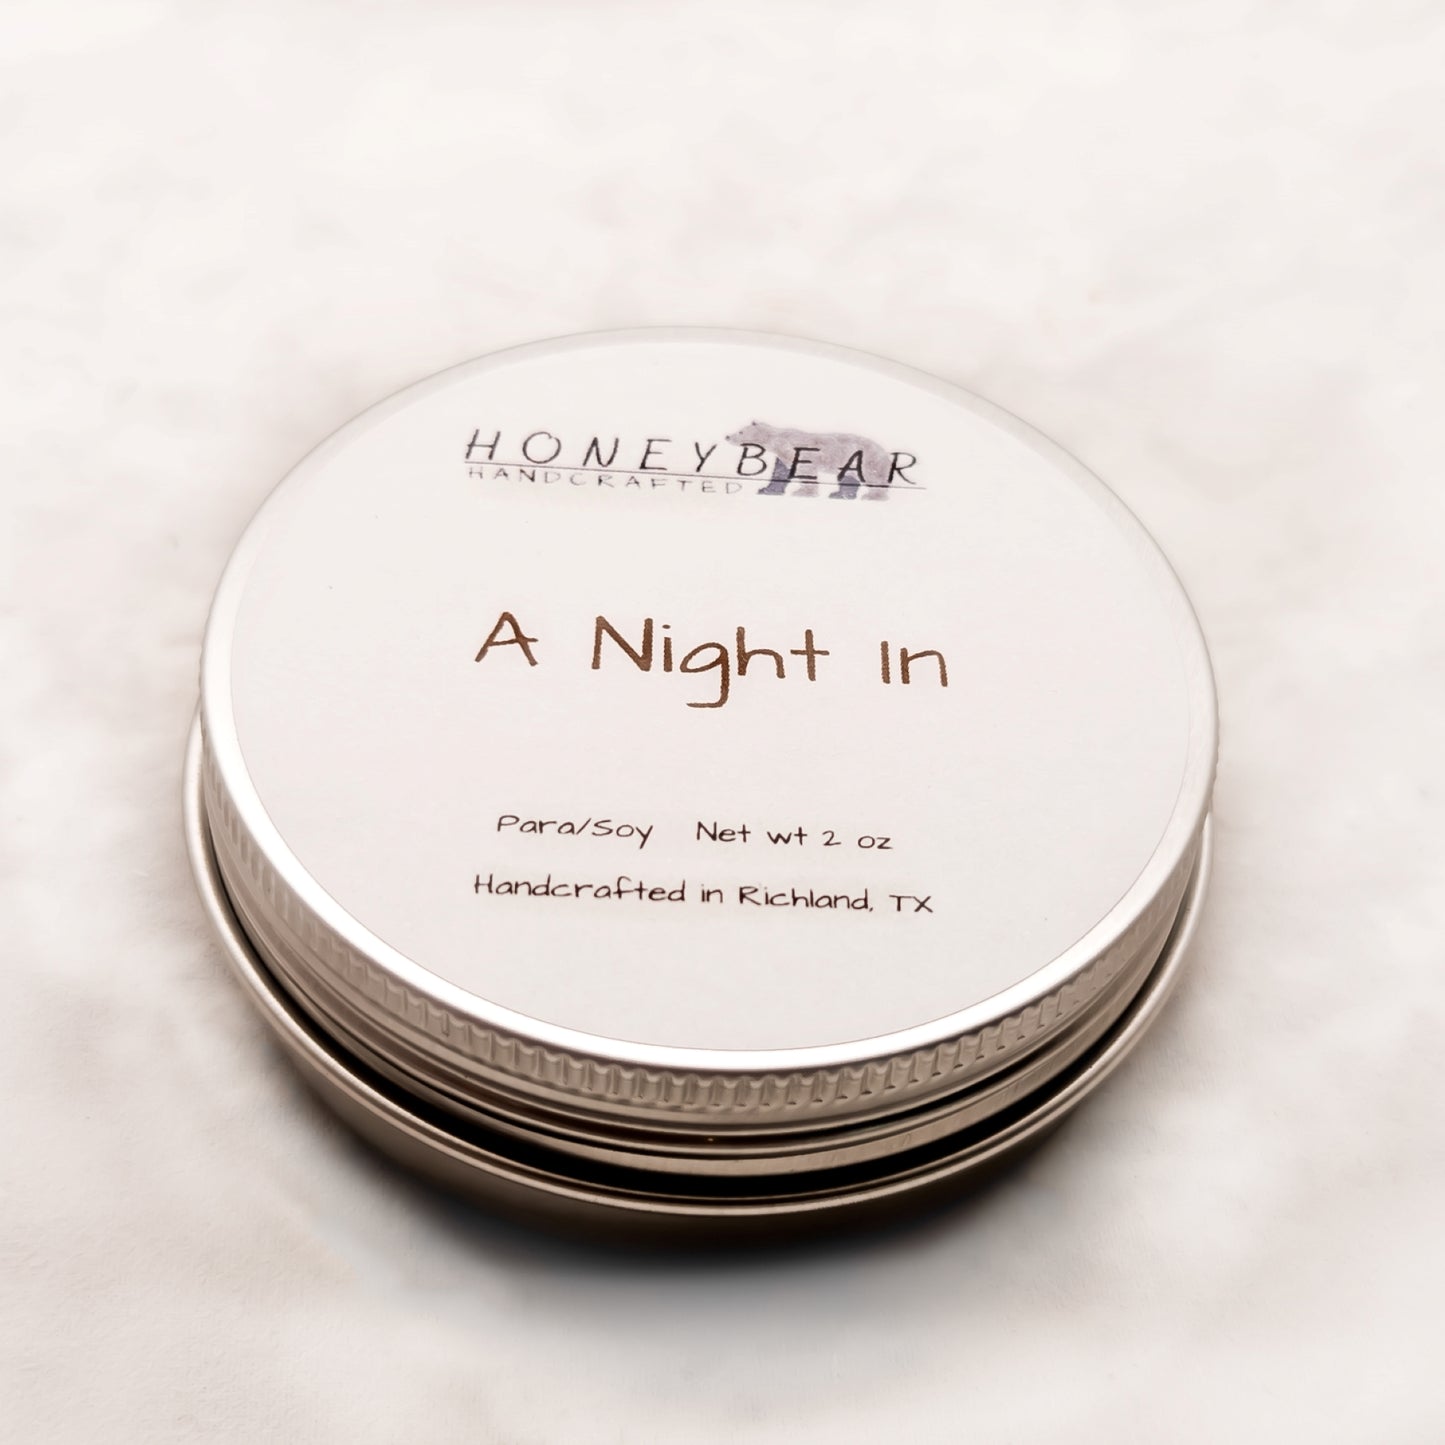 image of 2 oz travel or sample size candle labeled A Night in on a white background